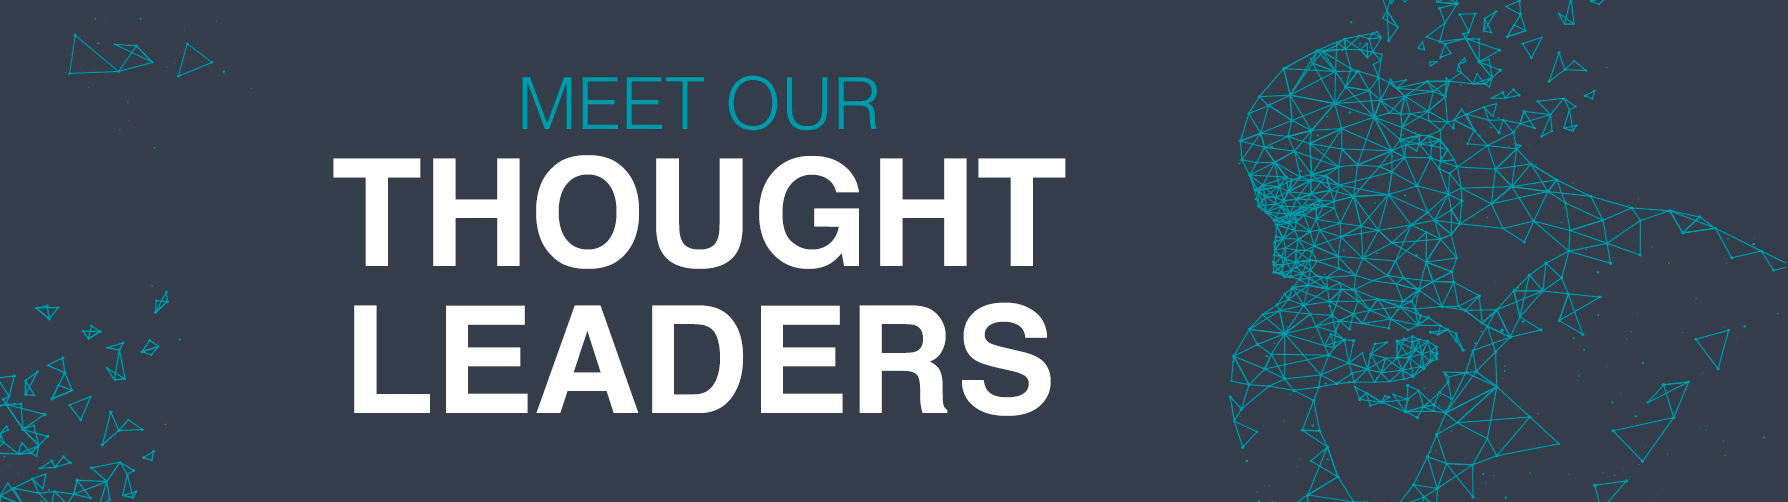 Meet Our Thought Leaders